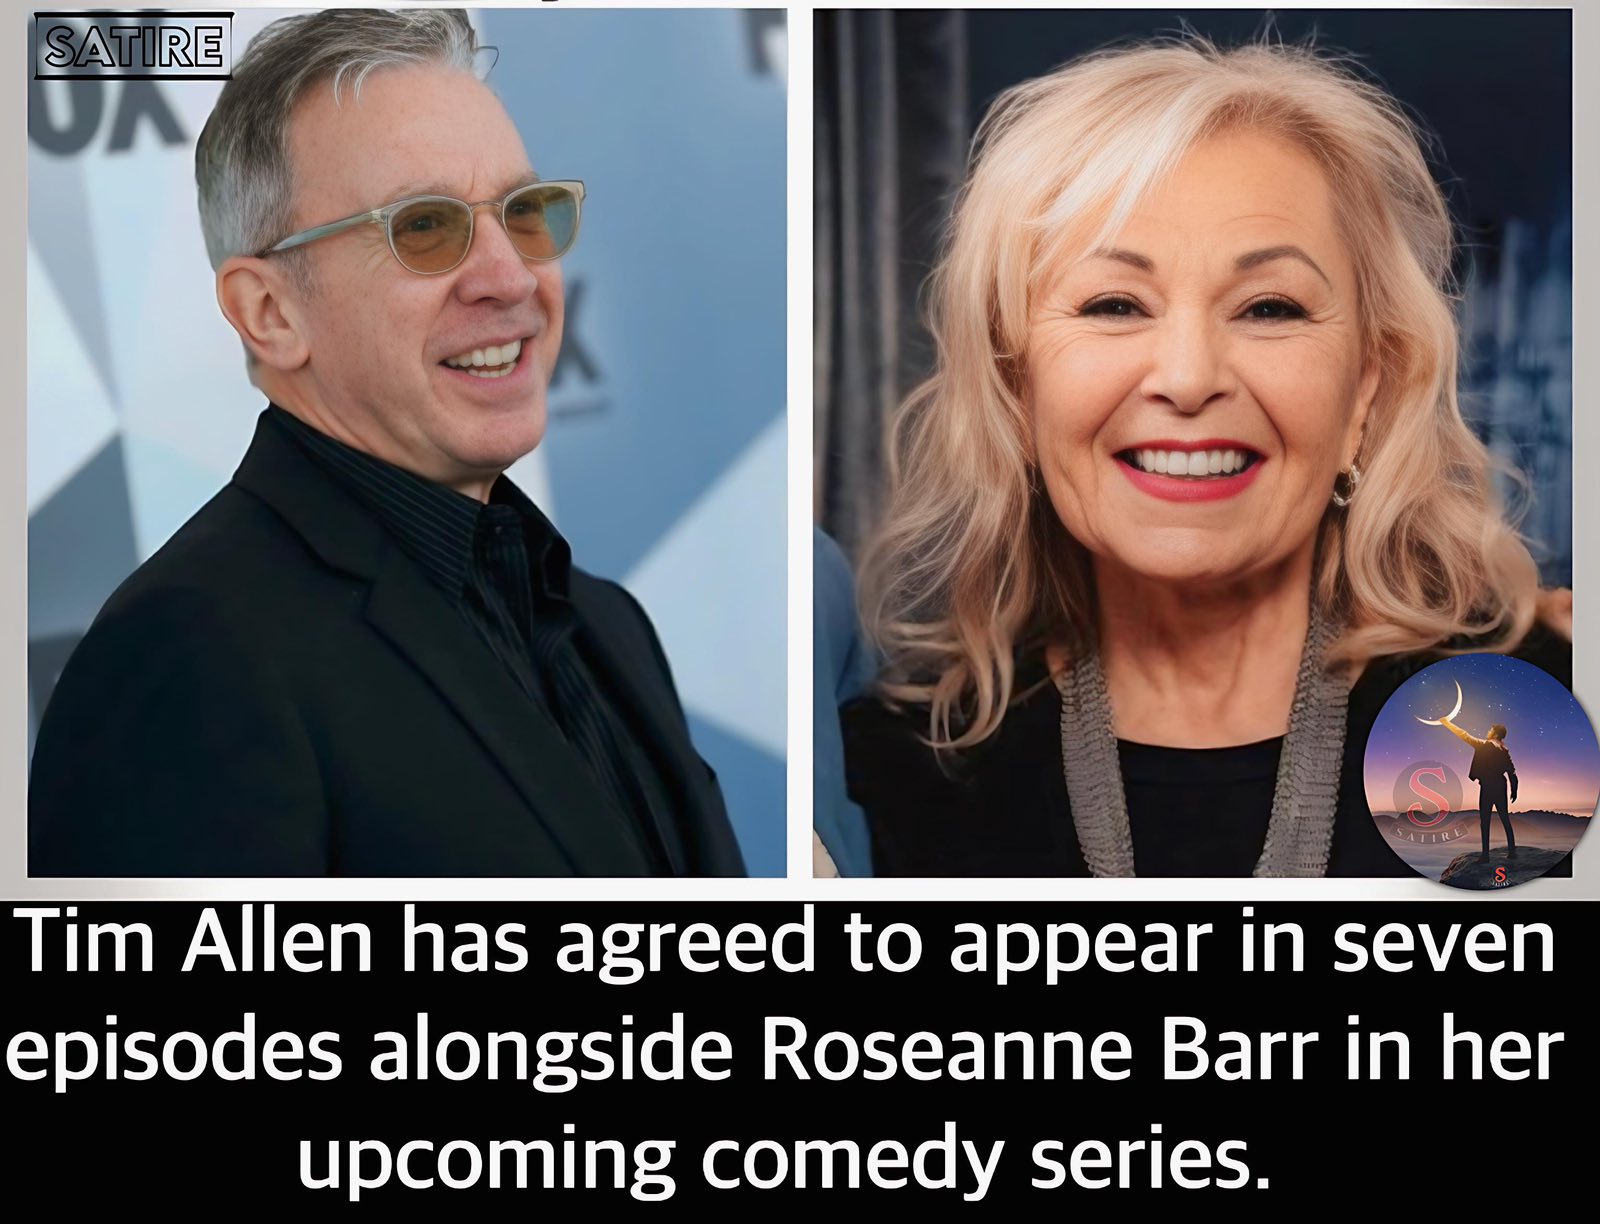 Tim Allen has agreed to appear in seven episodes alongside Roseanne Barr in her upcoming comedy series.